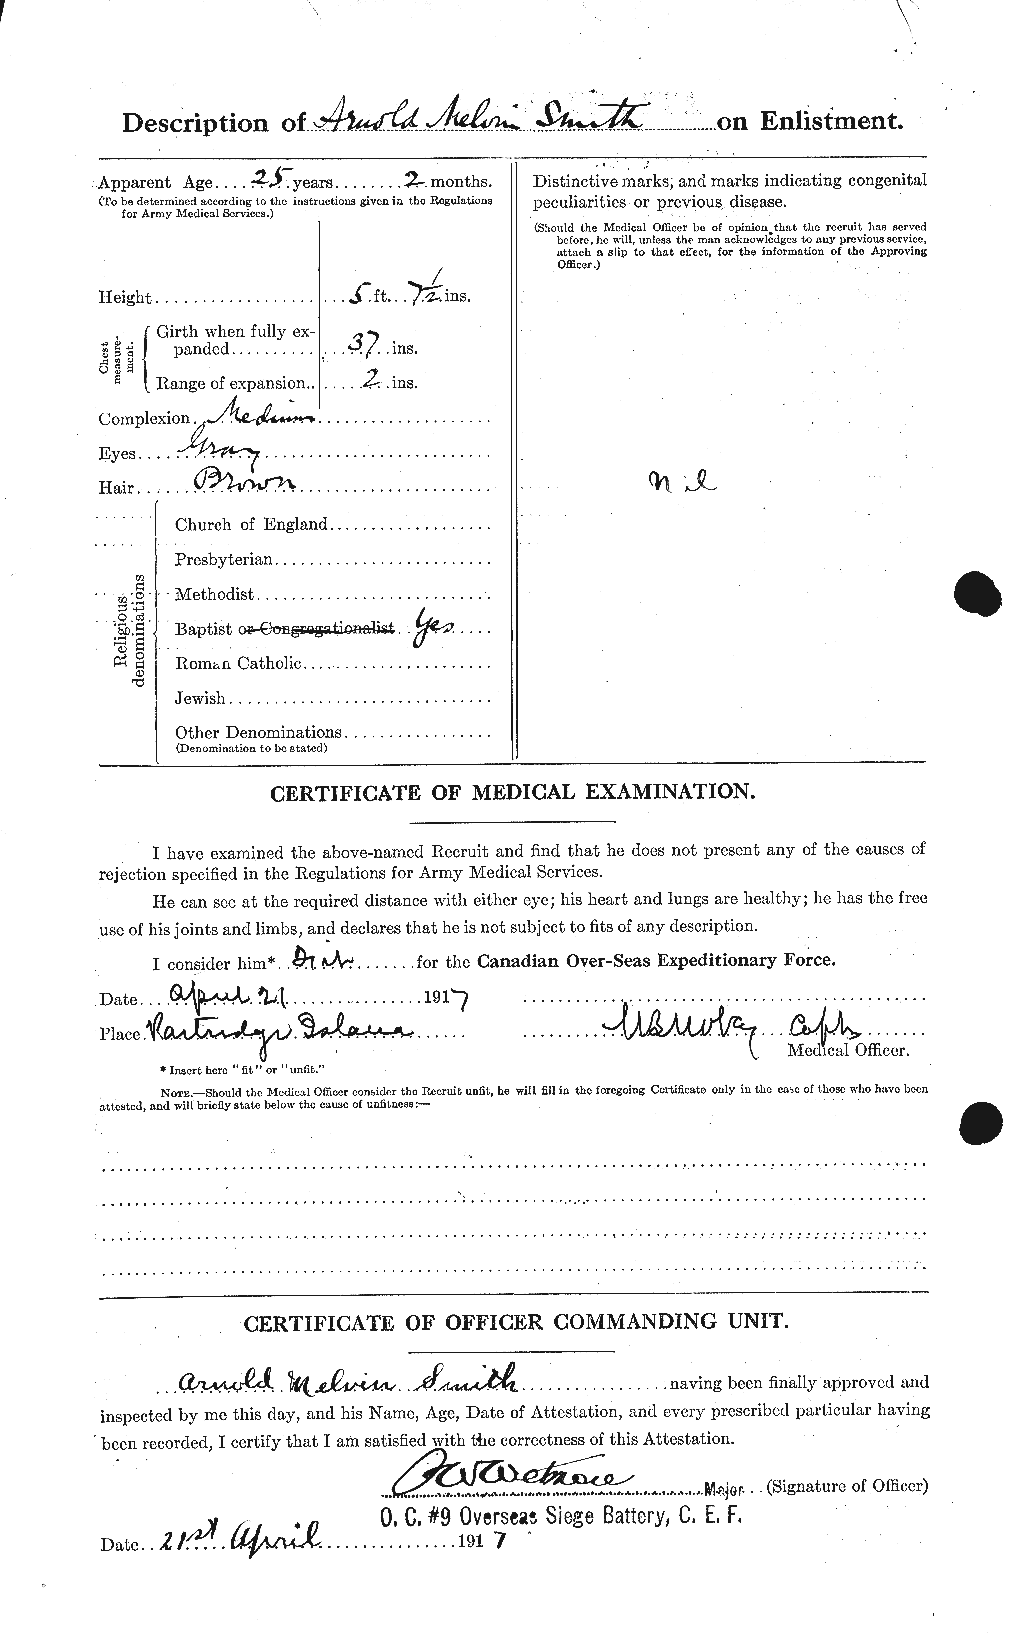 Personnel Records of the First World War - CEF 102193b